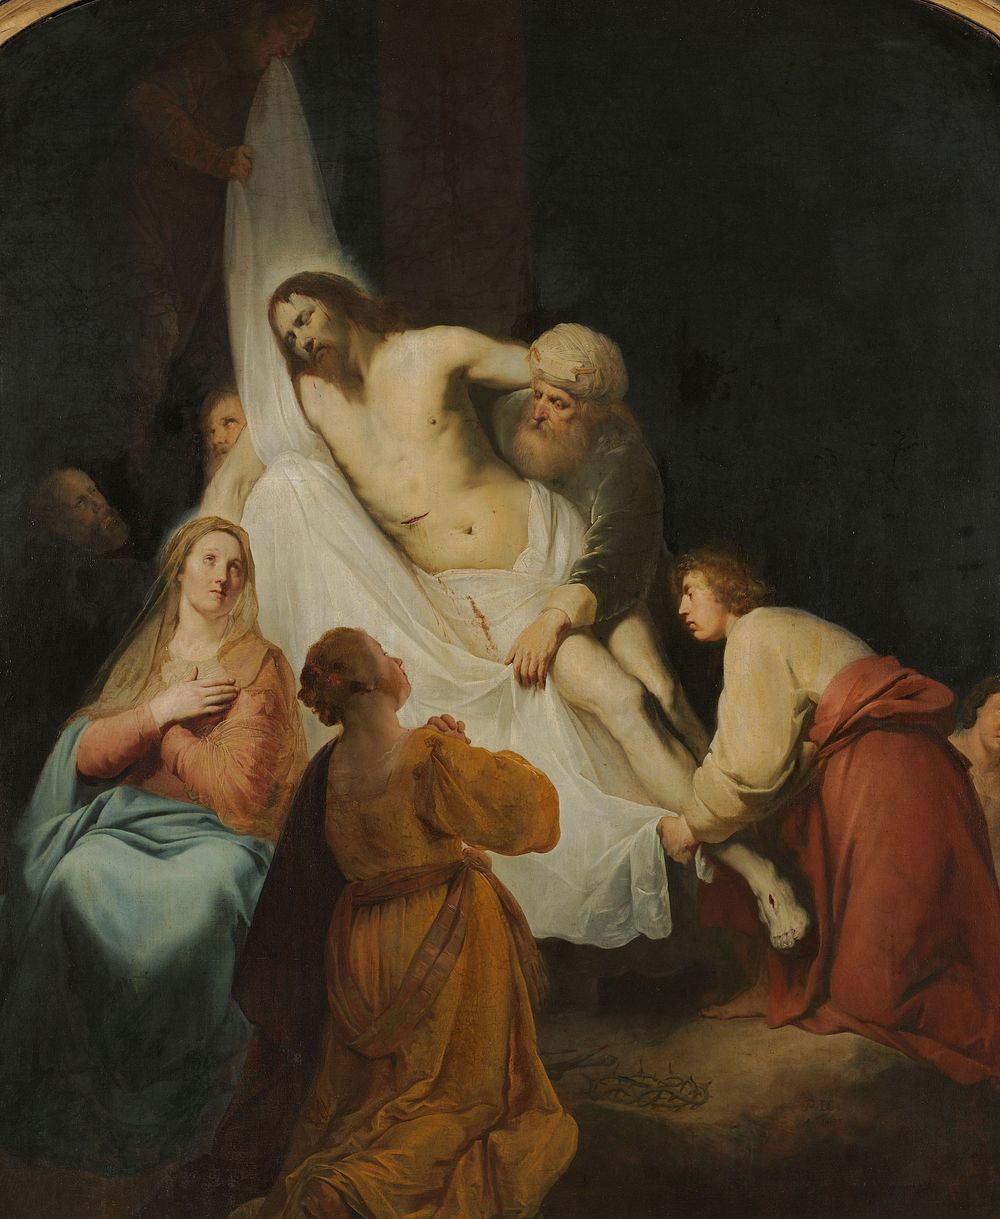 The Descent from the Cross (1633) by Pieter Fransz de Grebber